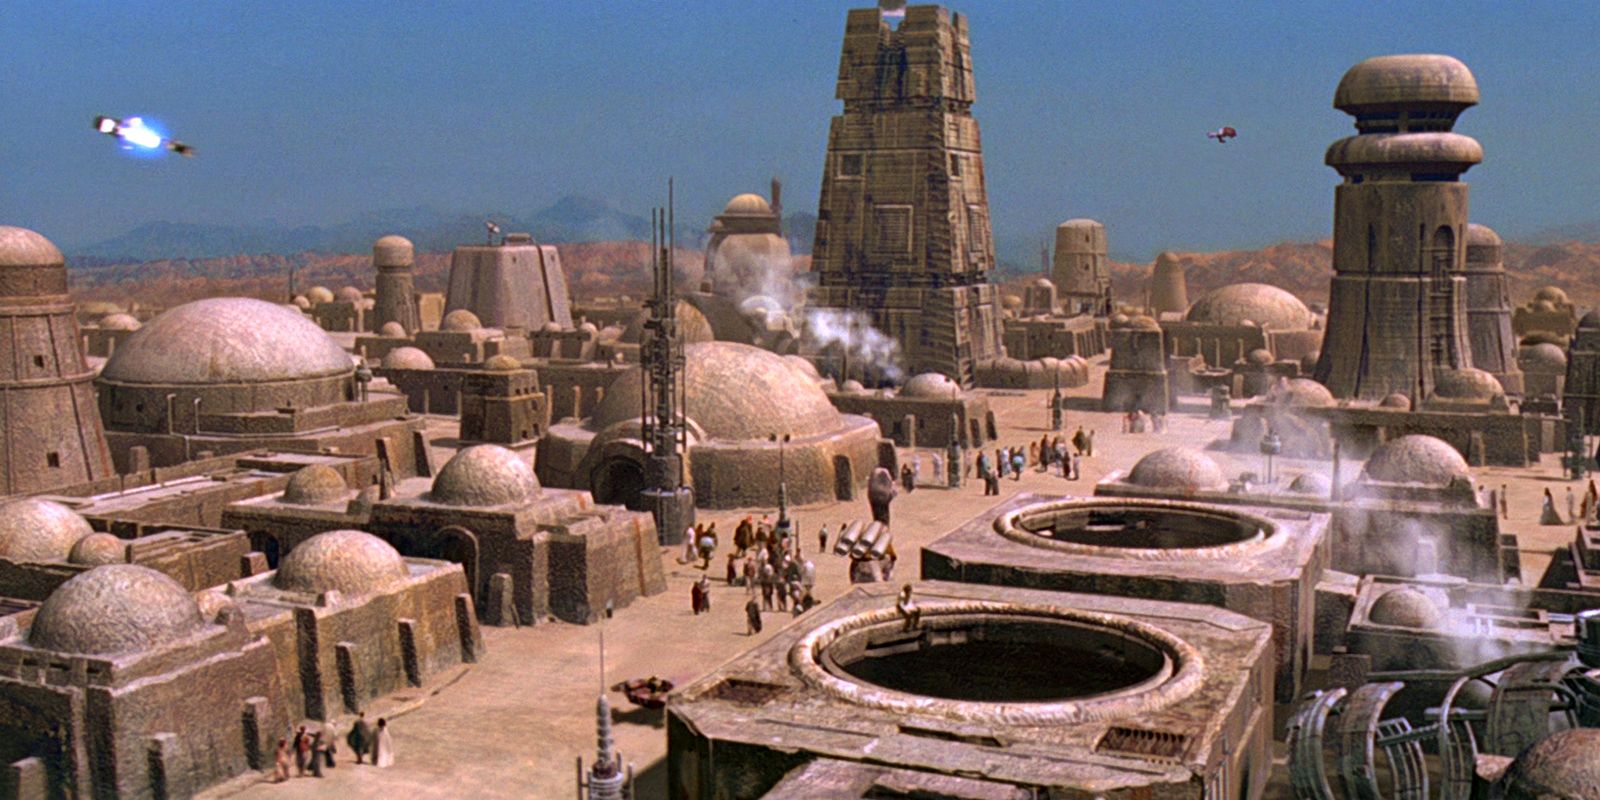 Mos Eisley Star Wars Episode IV A New Hope